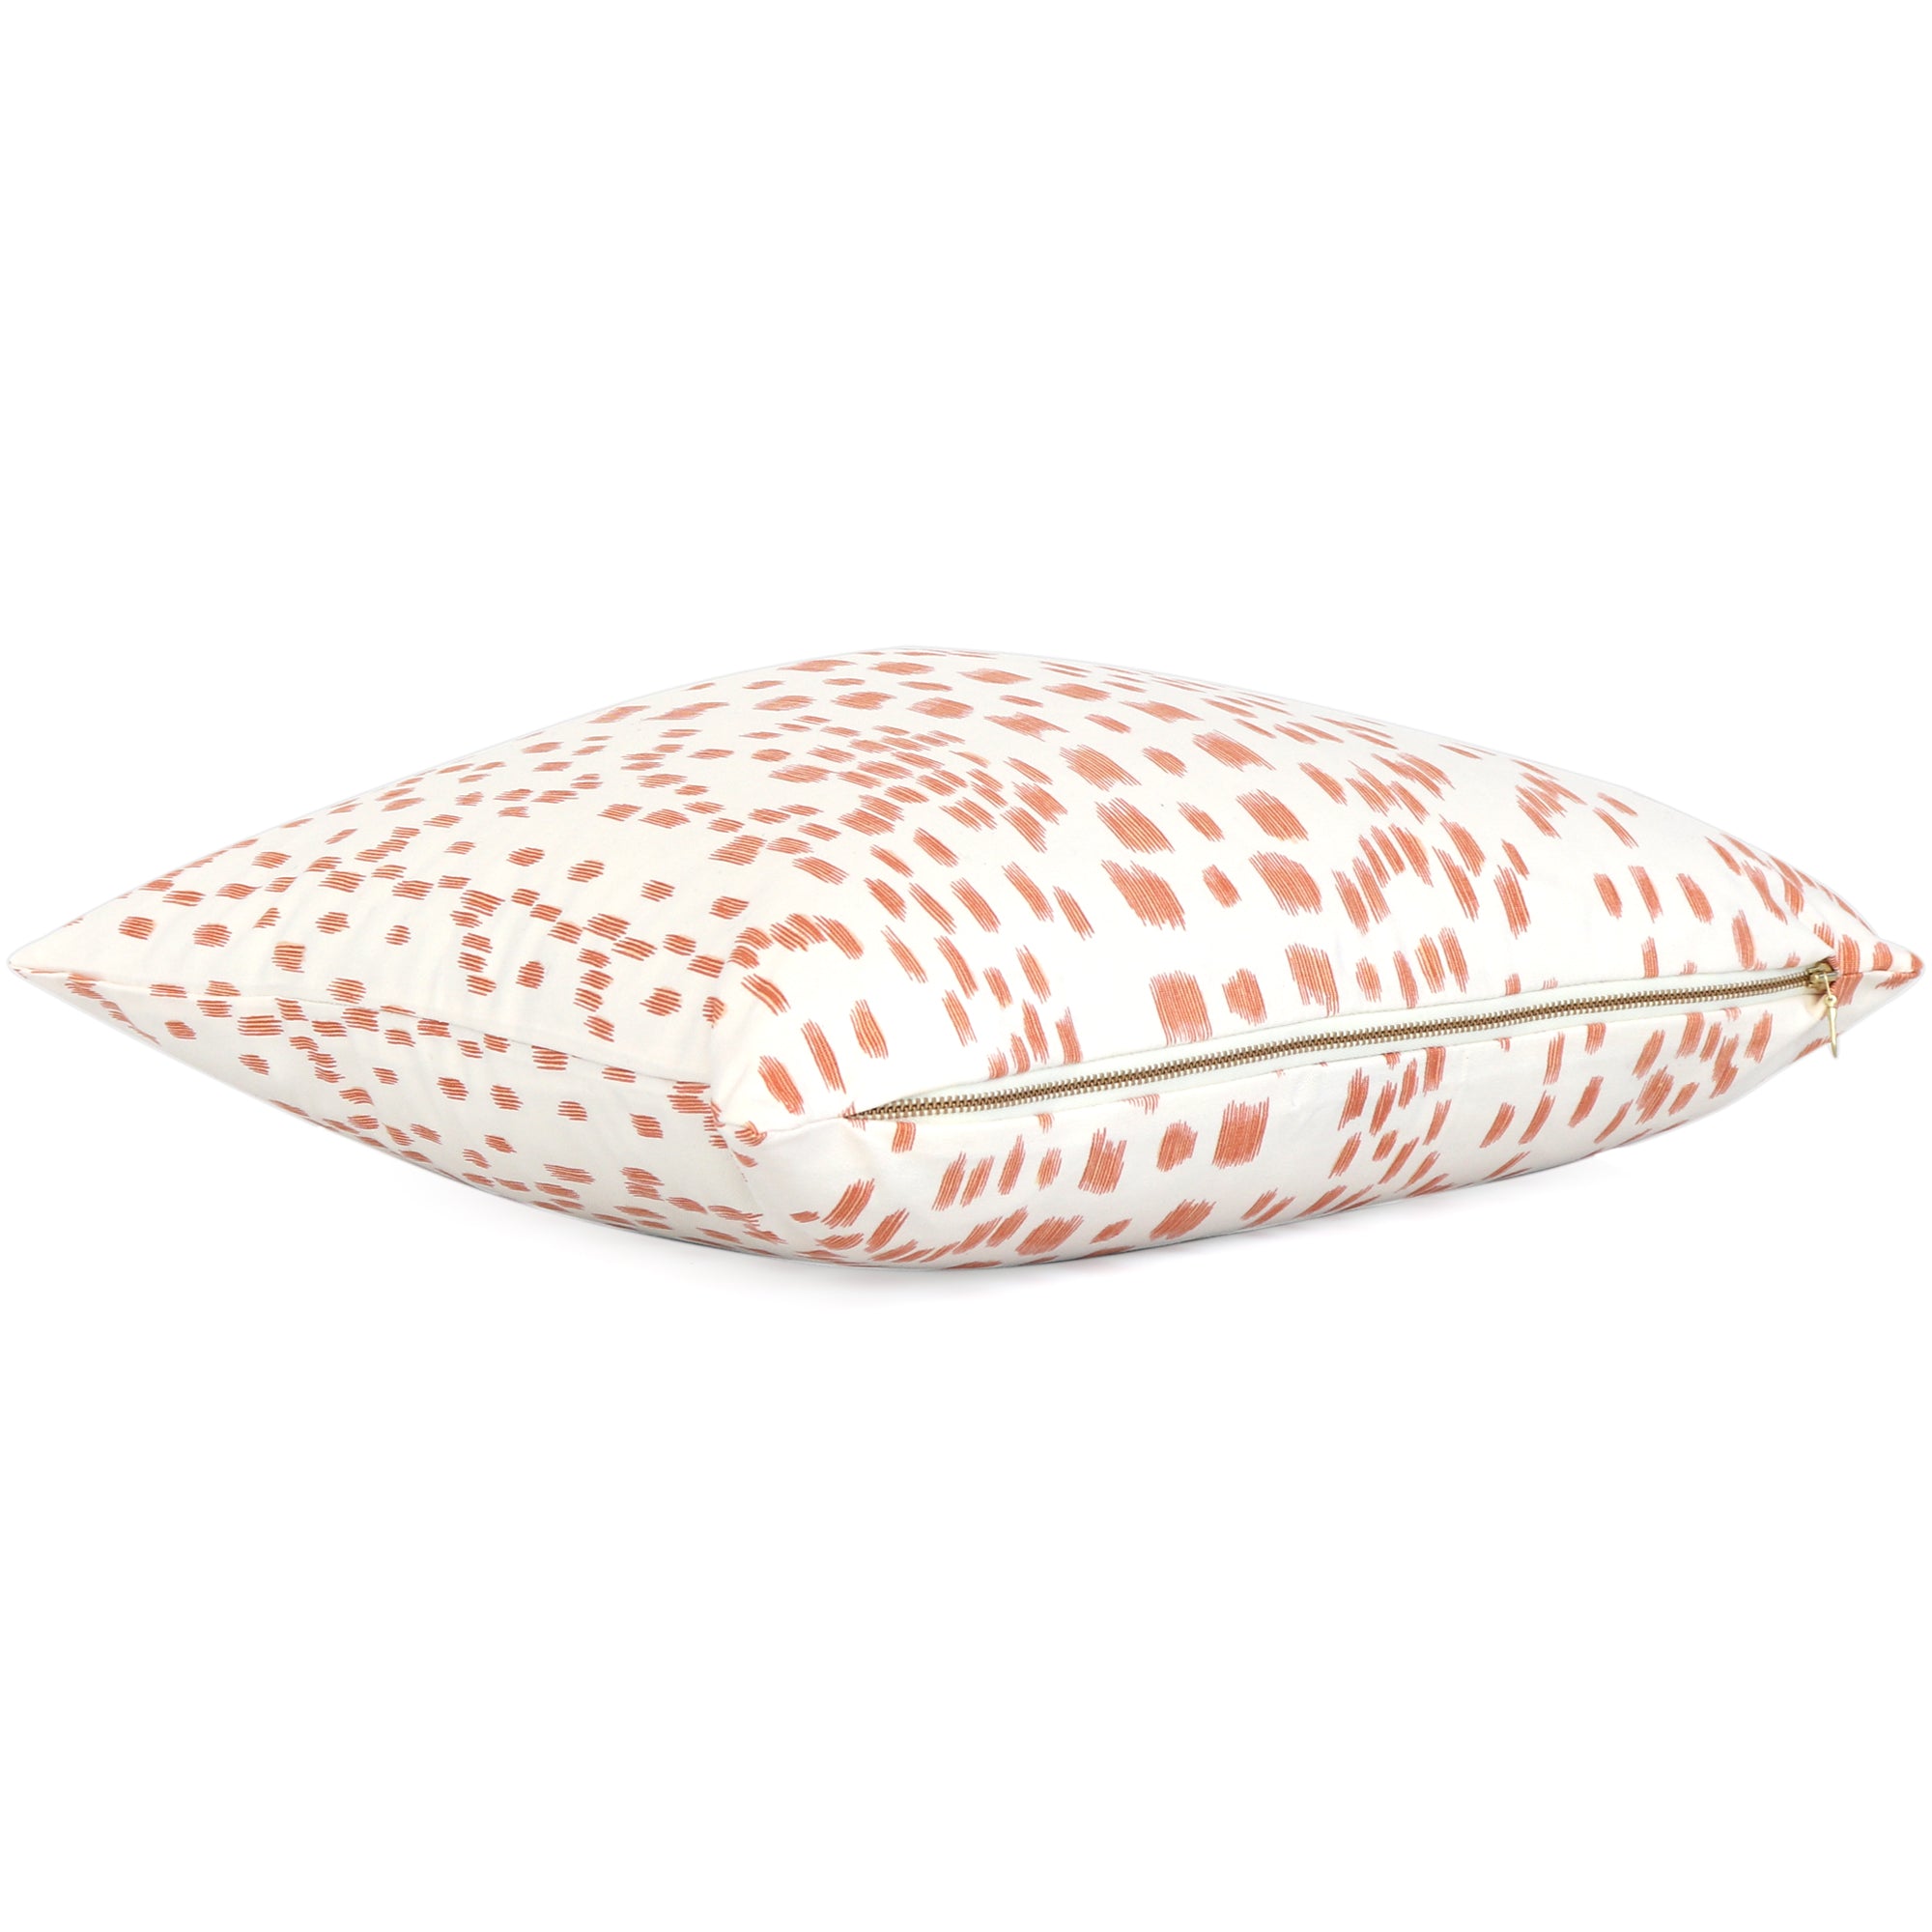 Les Touches Tangerine Throw Pillow Cover with Zipper